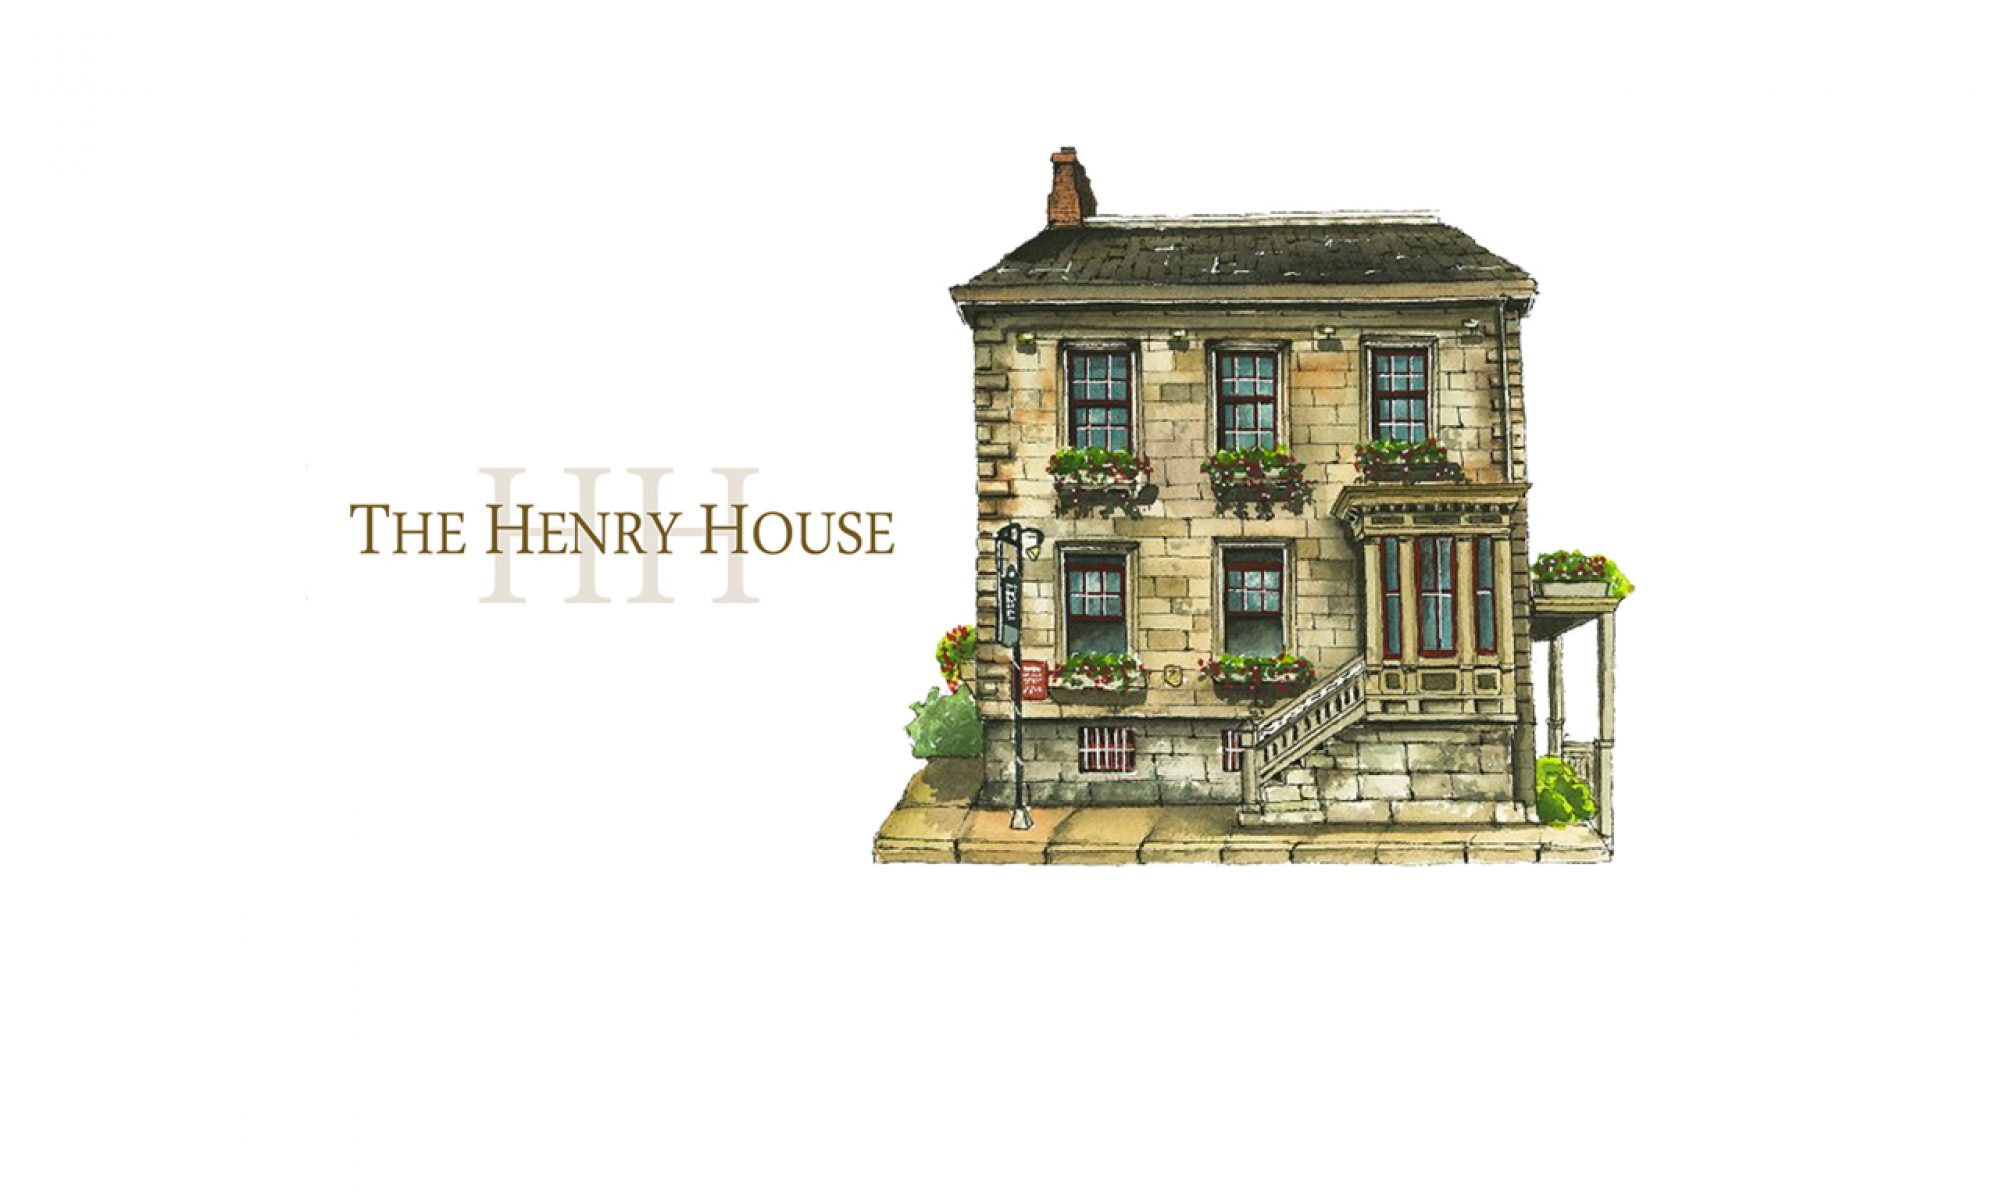 The Henry House